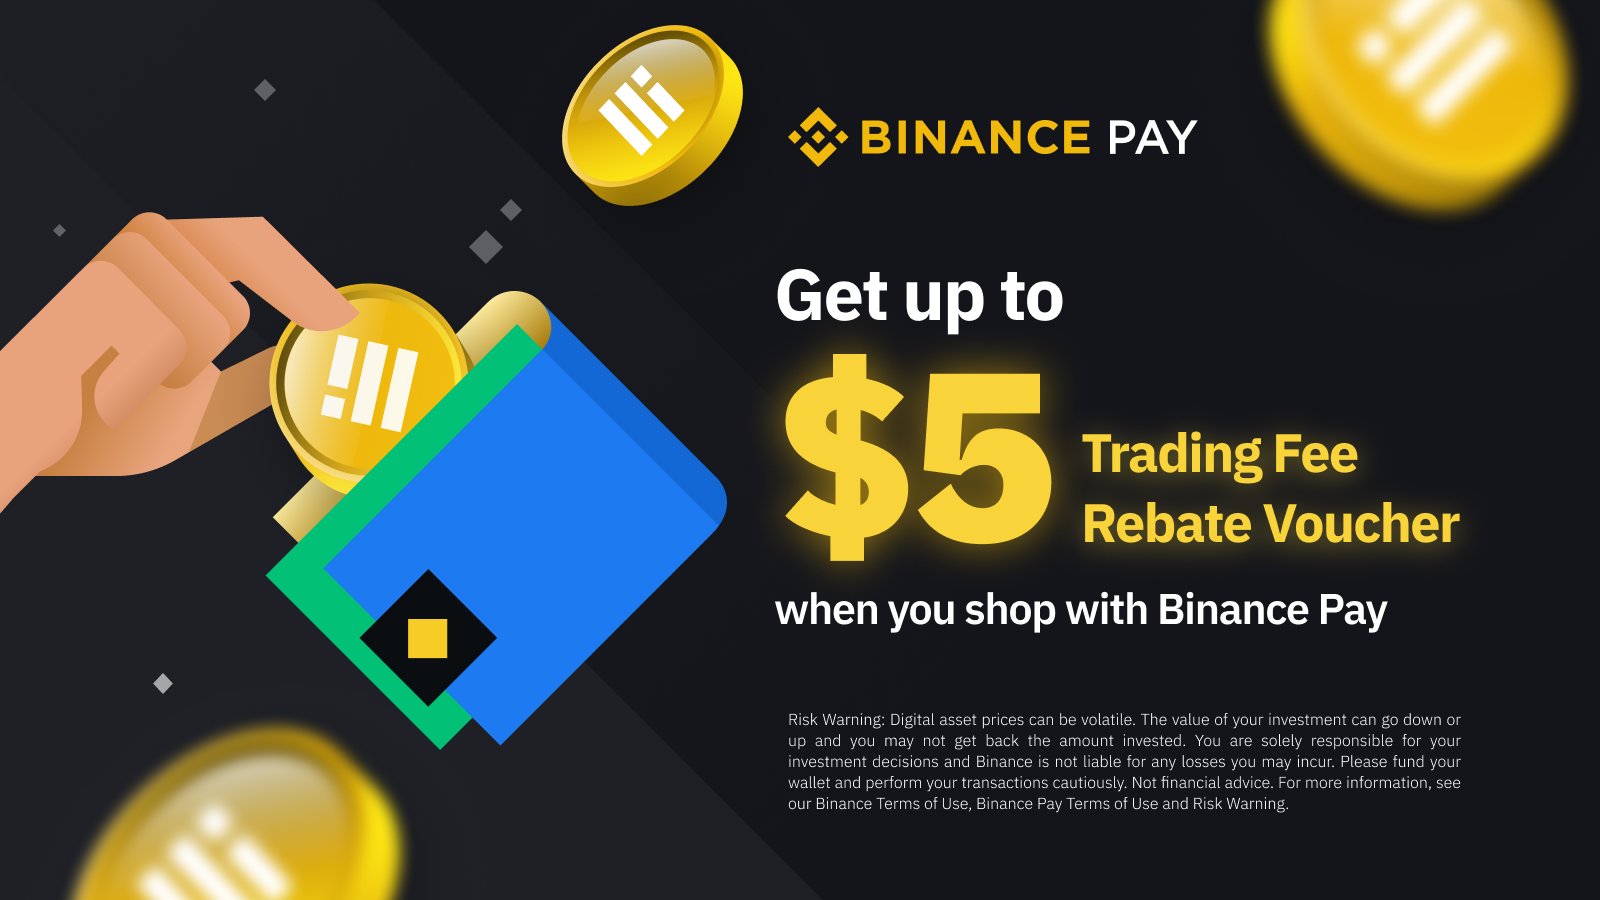 binance-on-twitter-shop-with-binance-pay-and-get-up-to-5-in-trading